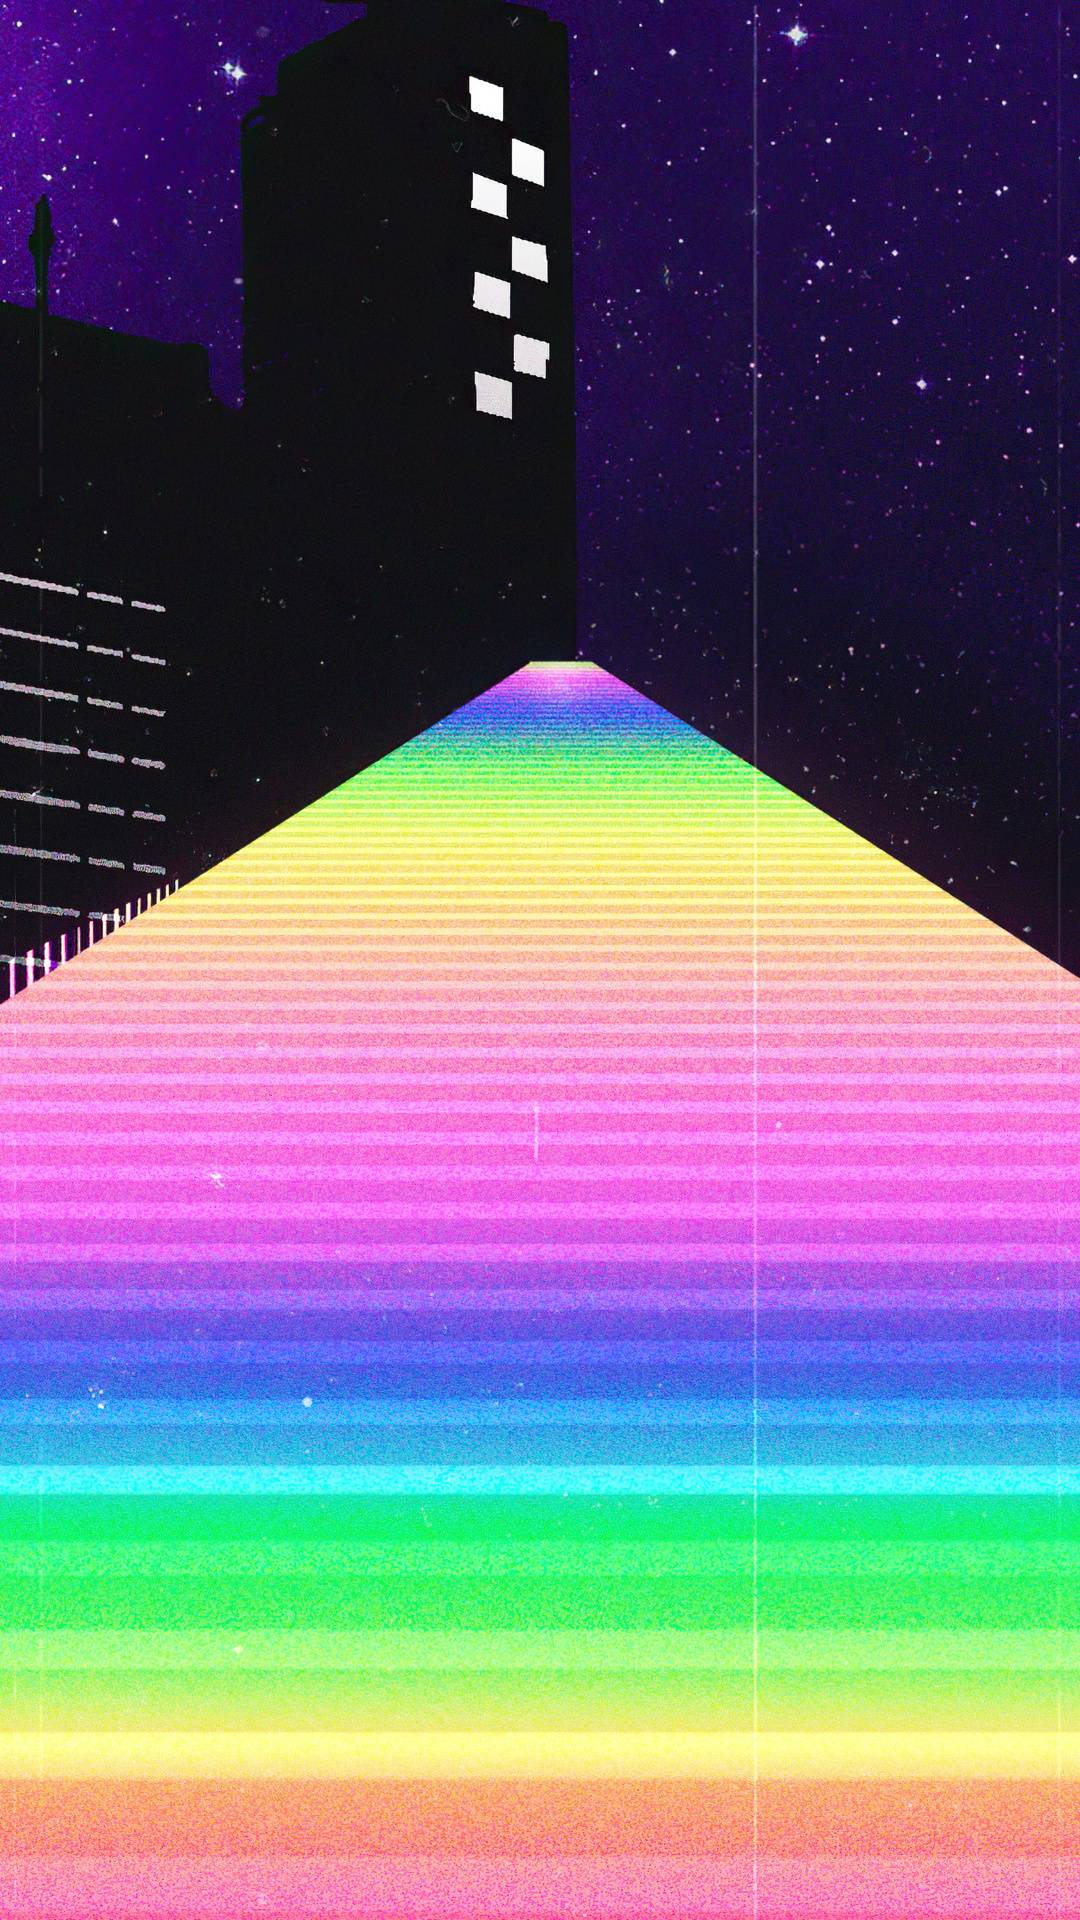 Aesthetic phone wallpaper with rainbow stairs and a city - VHS